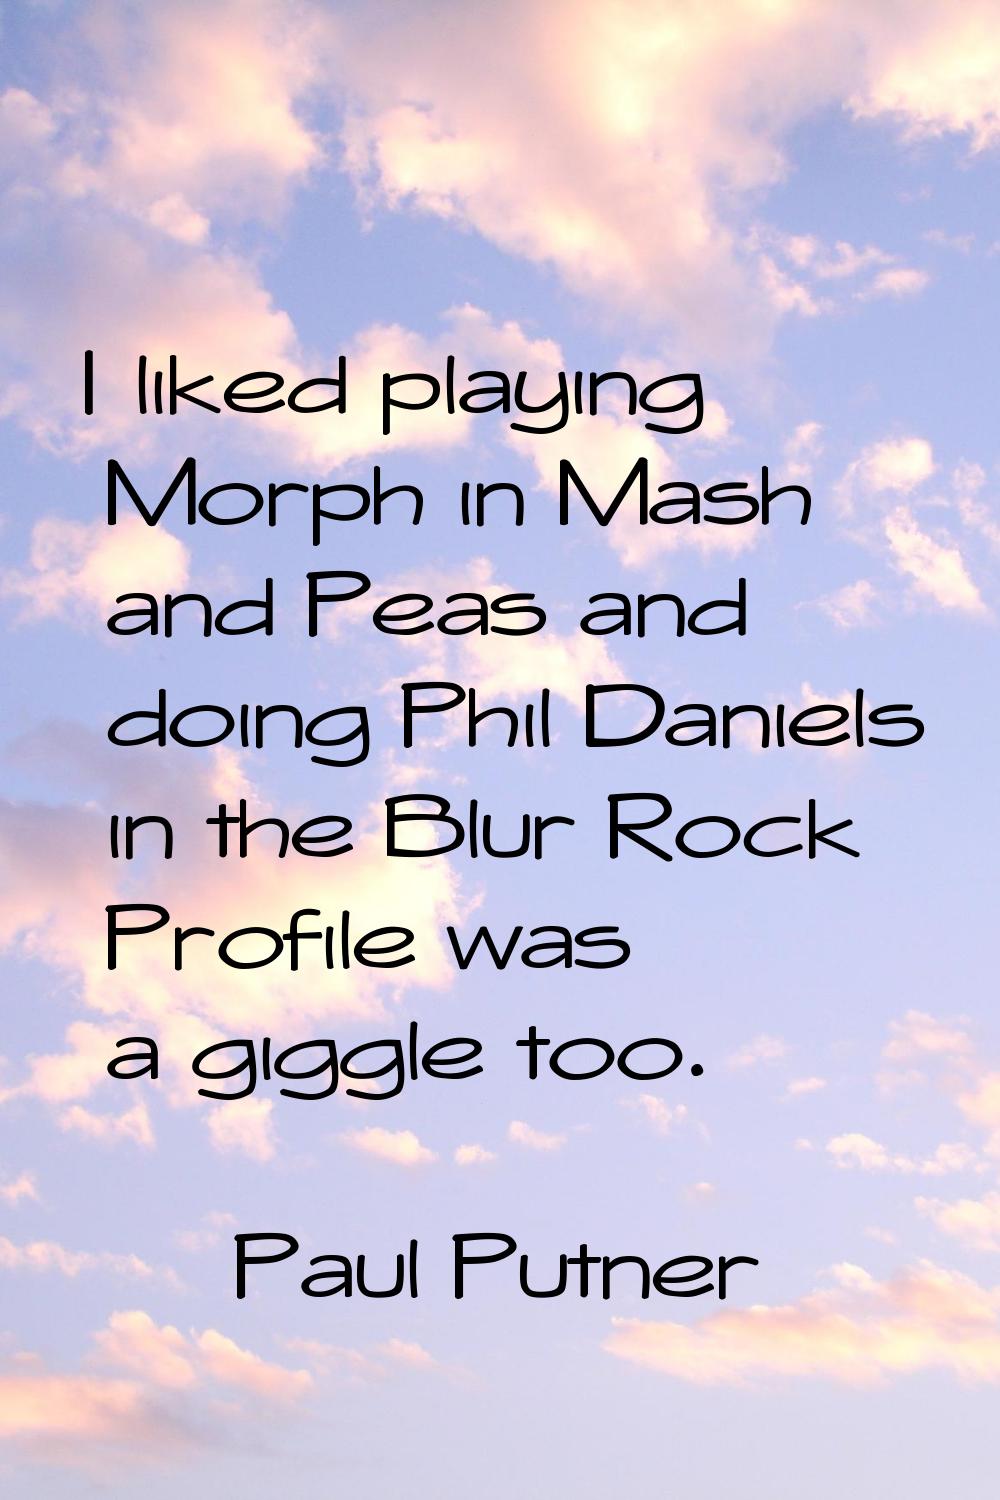 I liked playing Morph in Mash and Peas and doing Phil Daniels in the Blur Rock Profile was a giggle